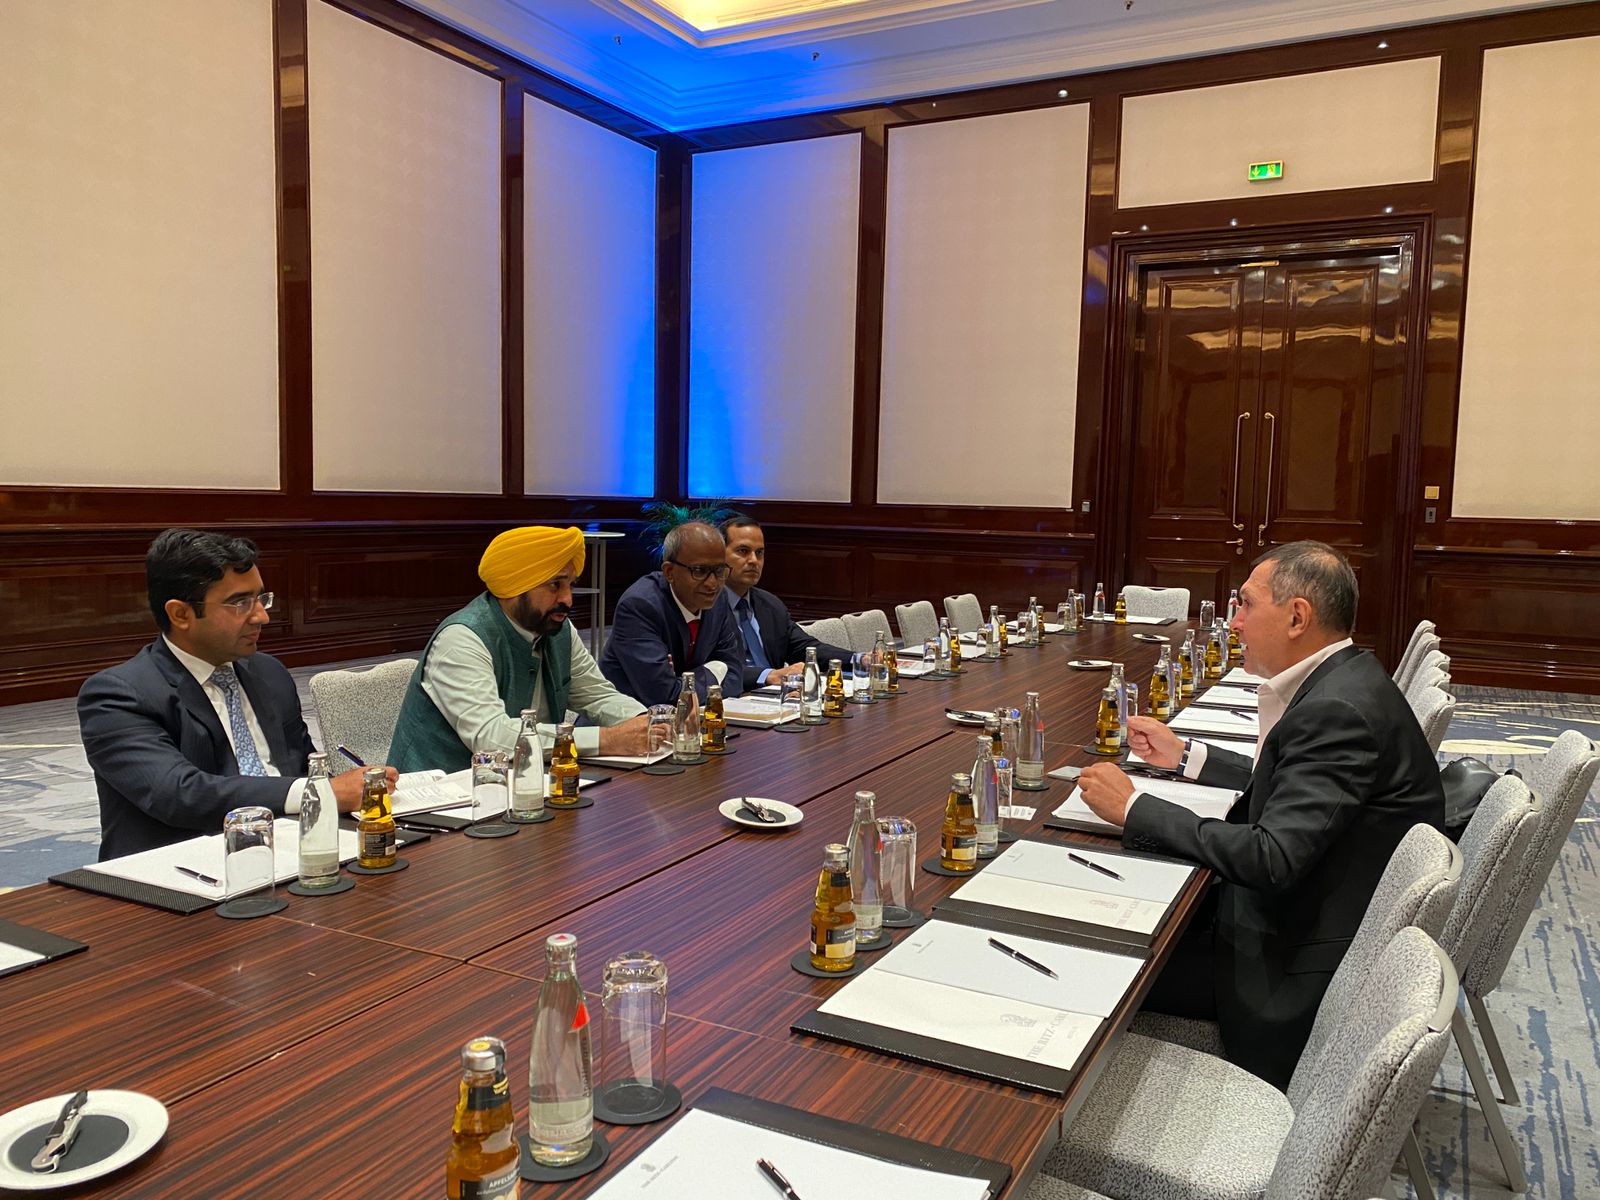 CM asks renewable energy giant Verbio group to explore future collaboration opportunities with Punjab